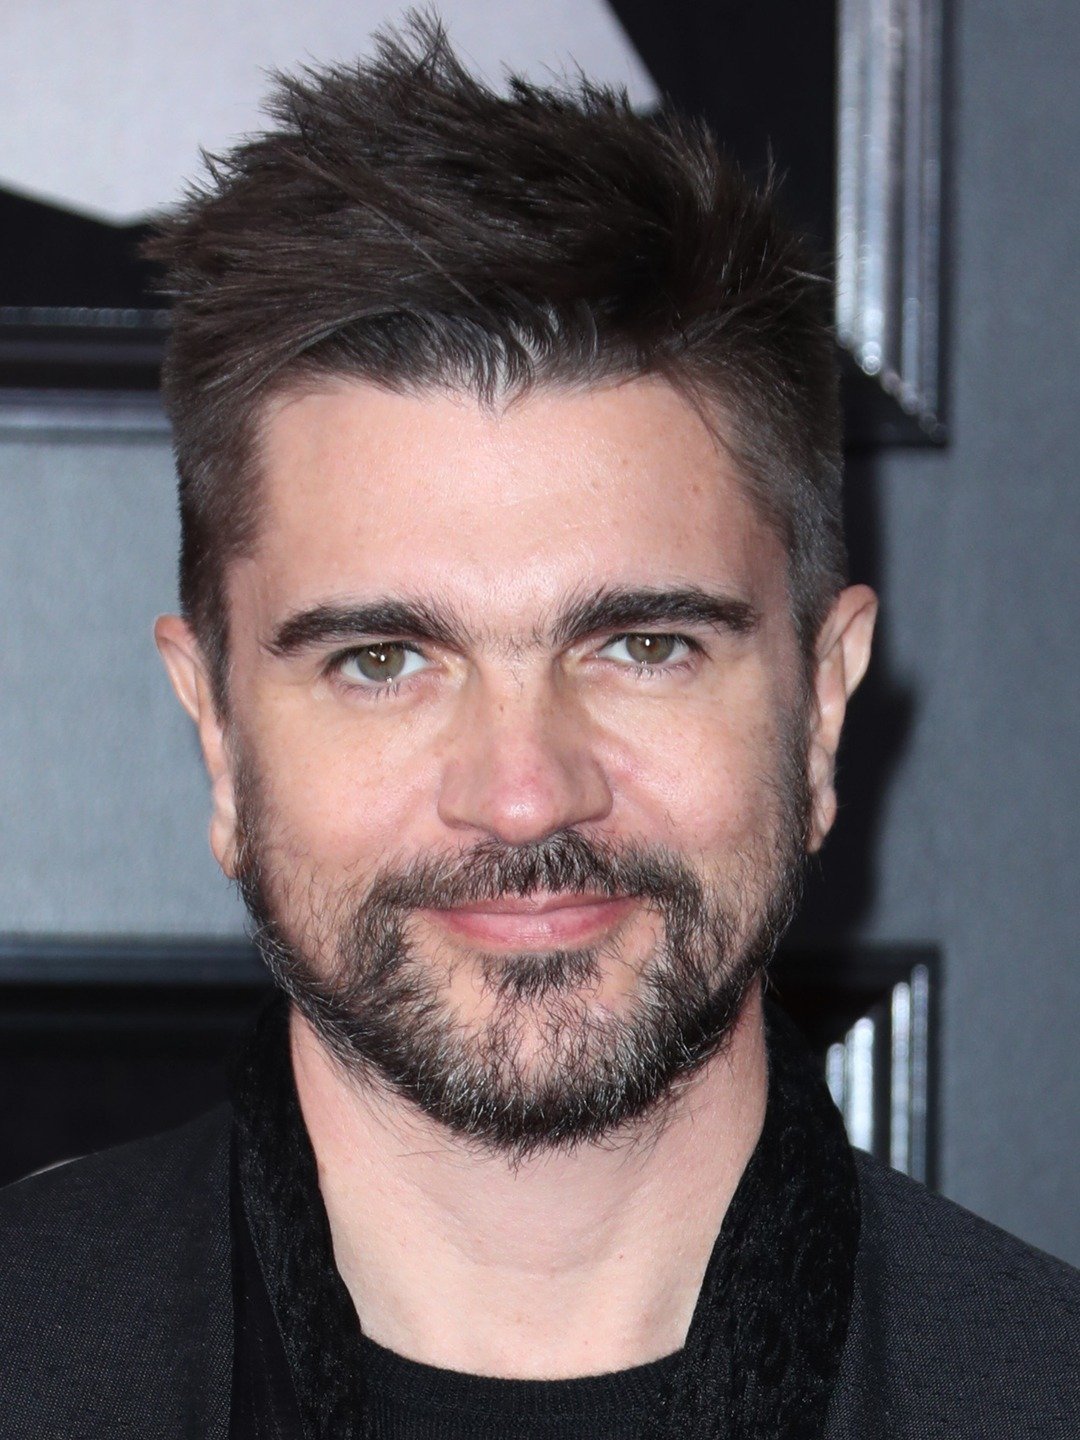 Juanes Honored with Person of the Year